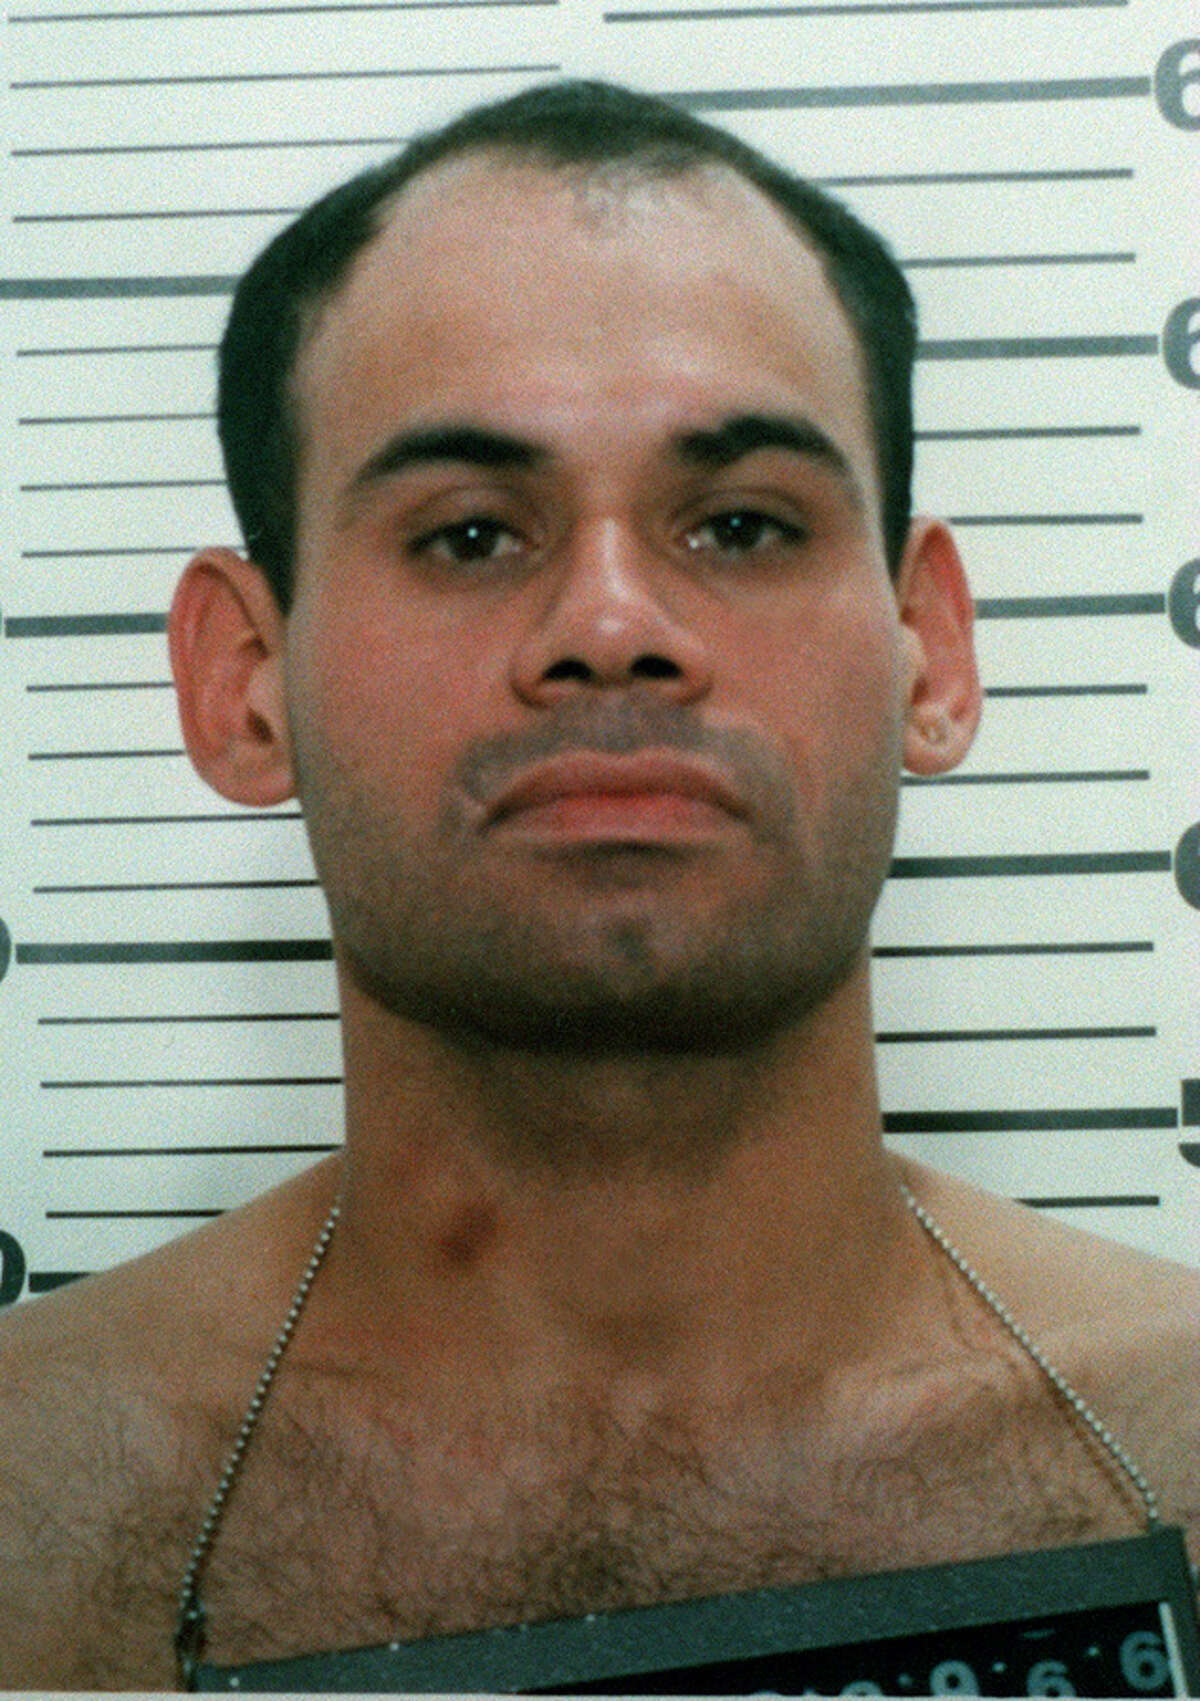 Manuel Vasquez Age: 43 Execution: Still on death row Summary: Vasquez was convicted of strangling and robbing a woman for the Mexican Mafia for failing to pay them.